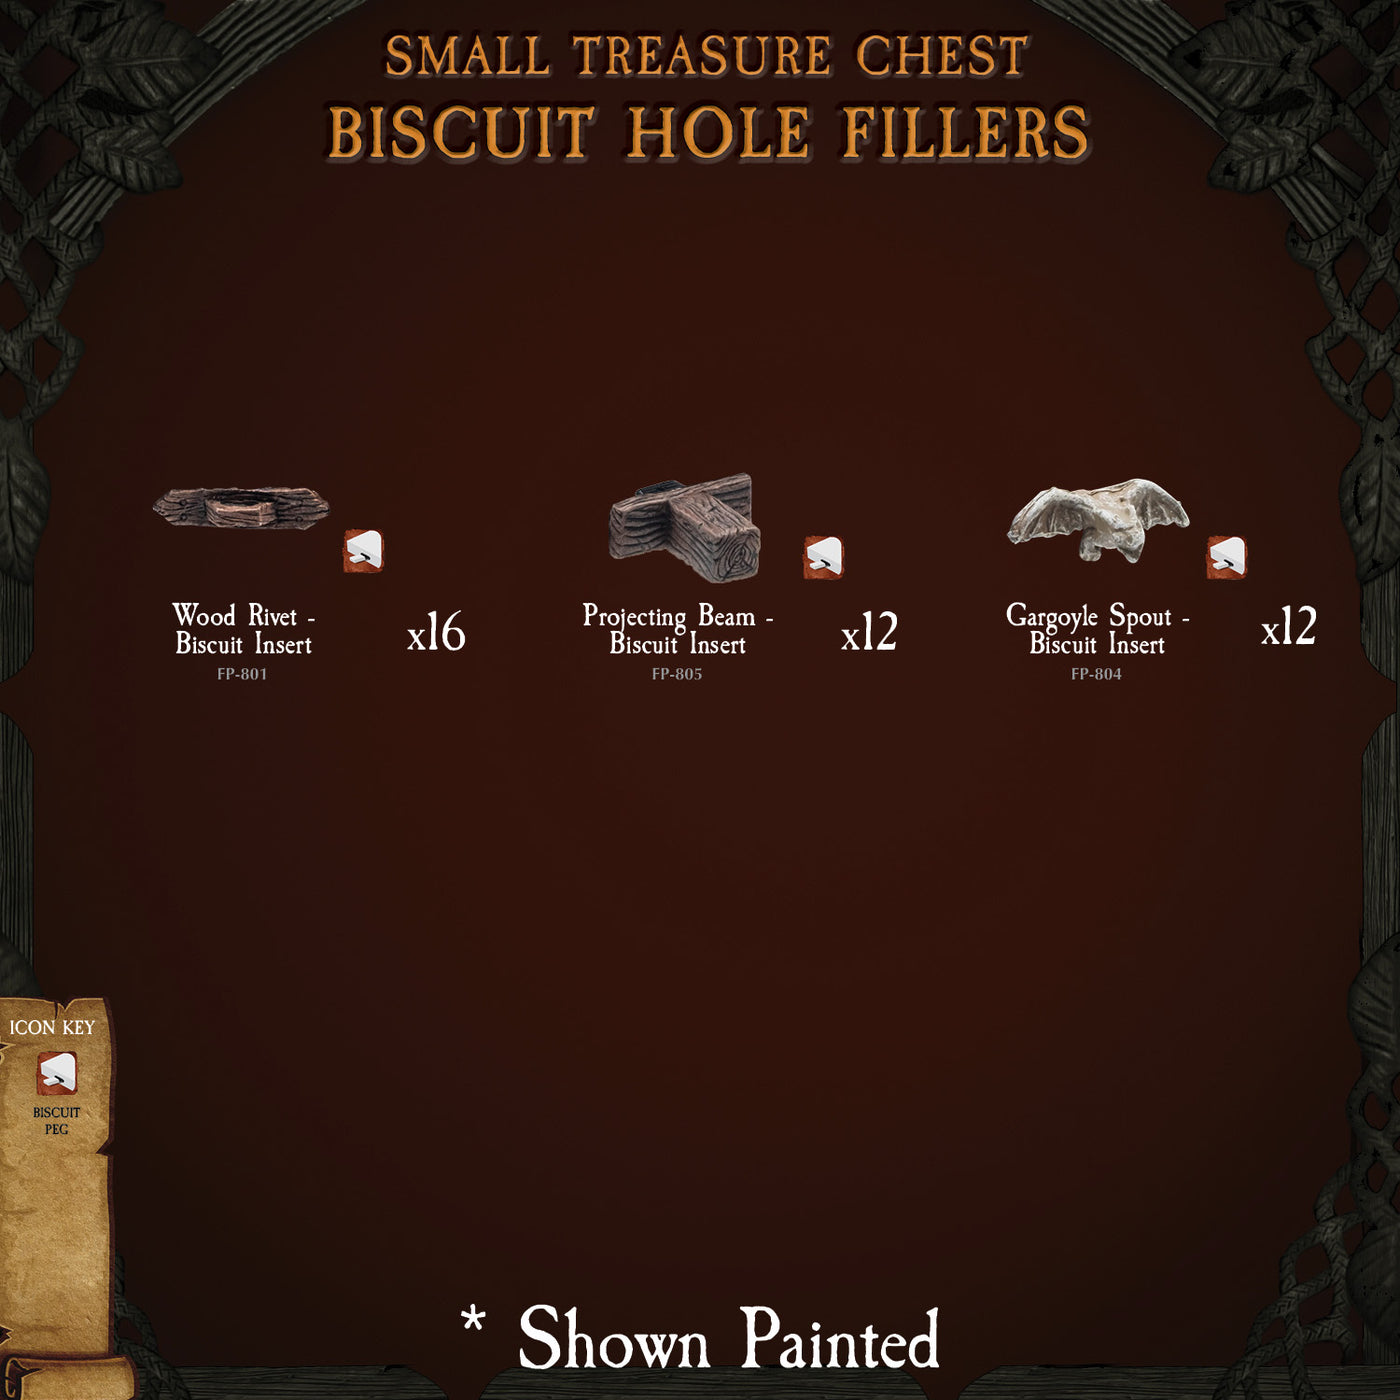 Small Treasure Chest - Biscuit Hole Fillers (Unpainted)